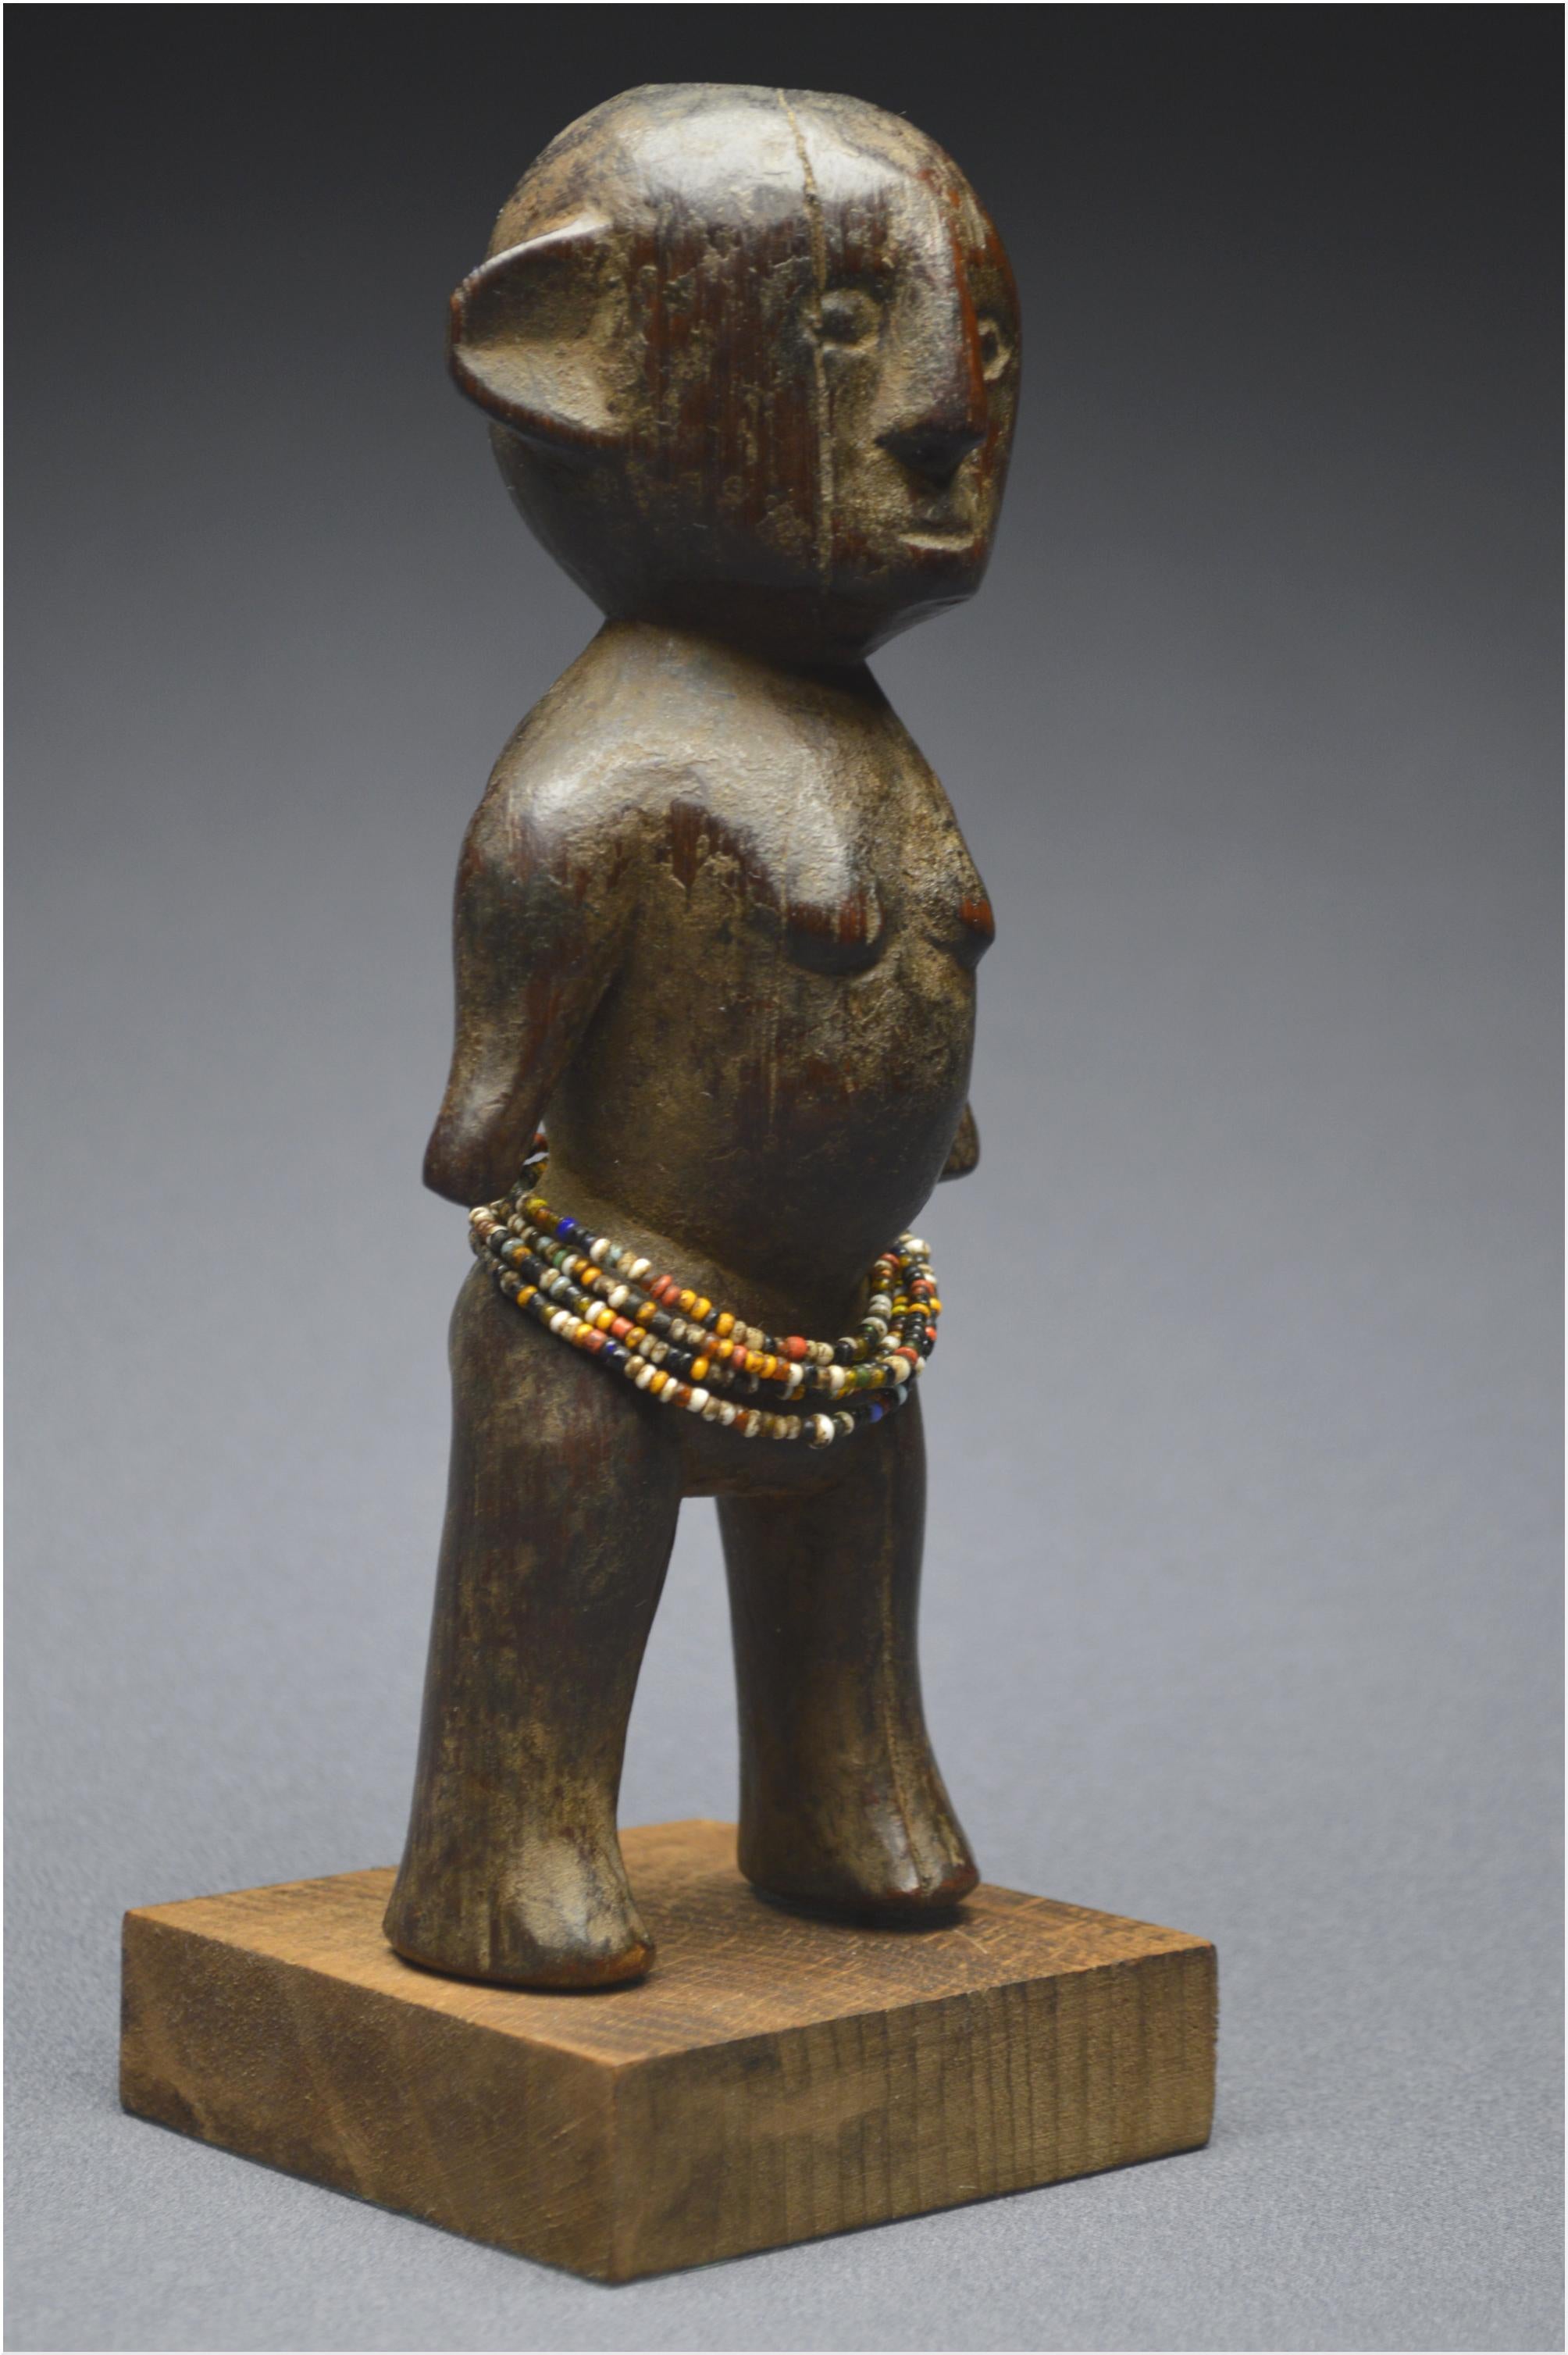 Old anthropomorphic statuette with shiny patina

Tanzania, Nyamwezi people
Mid-20th Century

Old fetish representing a female figure standing on powerful legs. The massive body girdled with a necklace of small multicolored pearls, accommodates